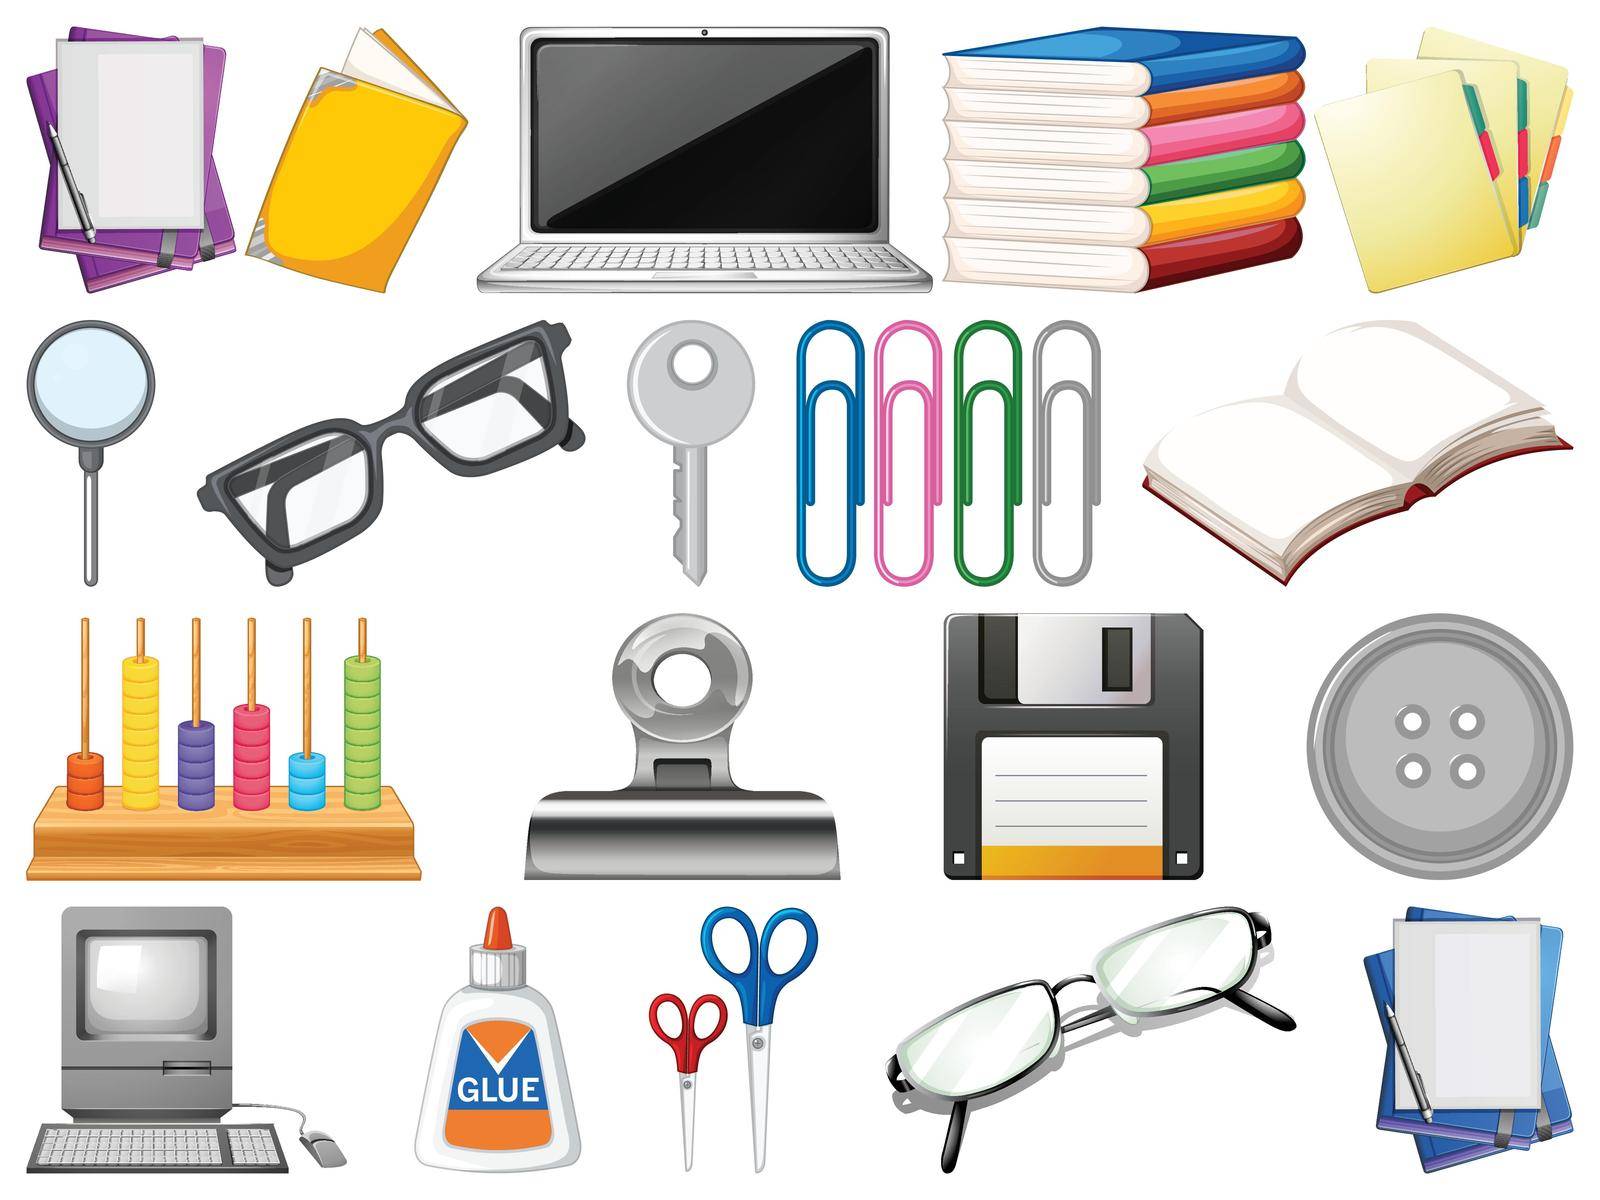 Set of office objects by iimages